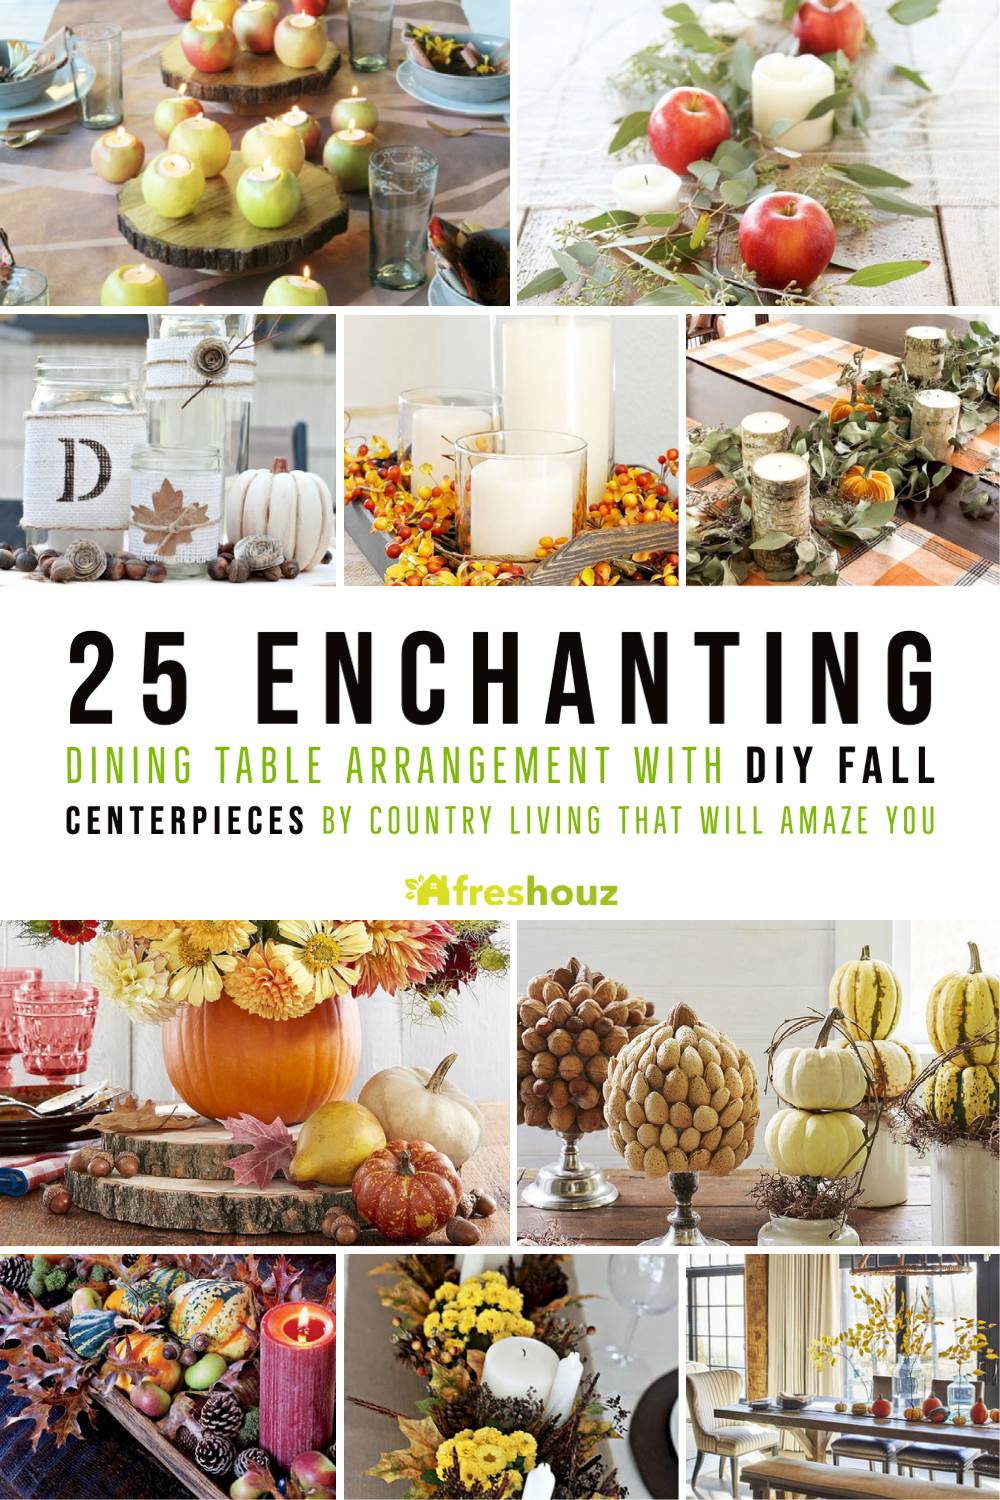 Enchanting Dining Table Arrangement With DIY Fall Centerpieces